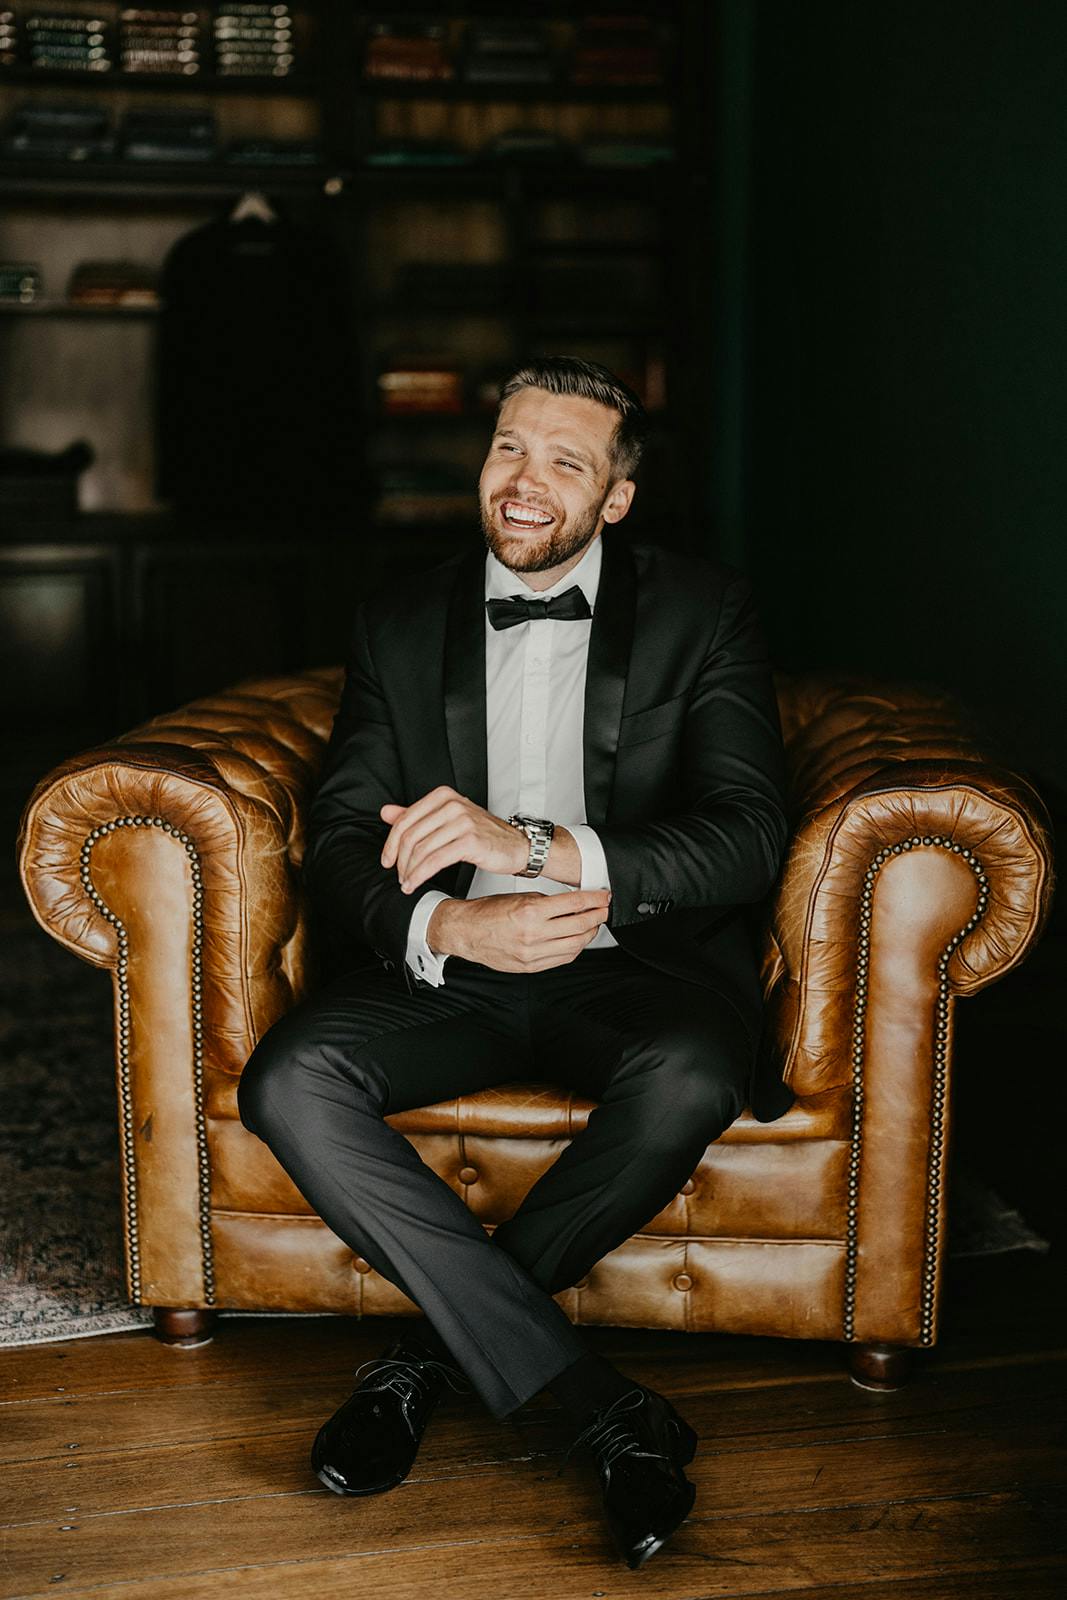 Groom sitiing in leather chair